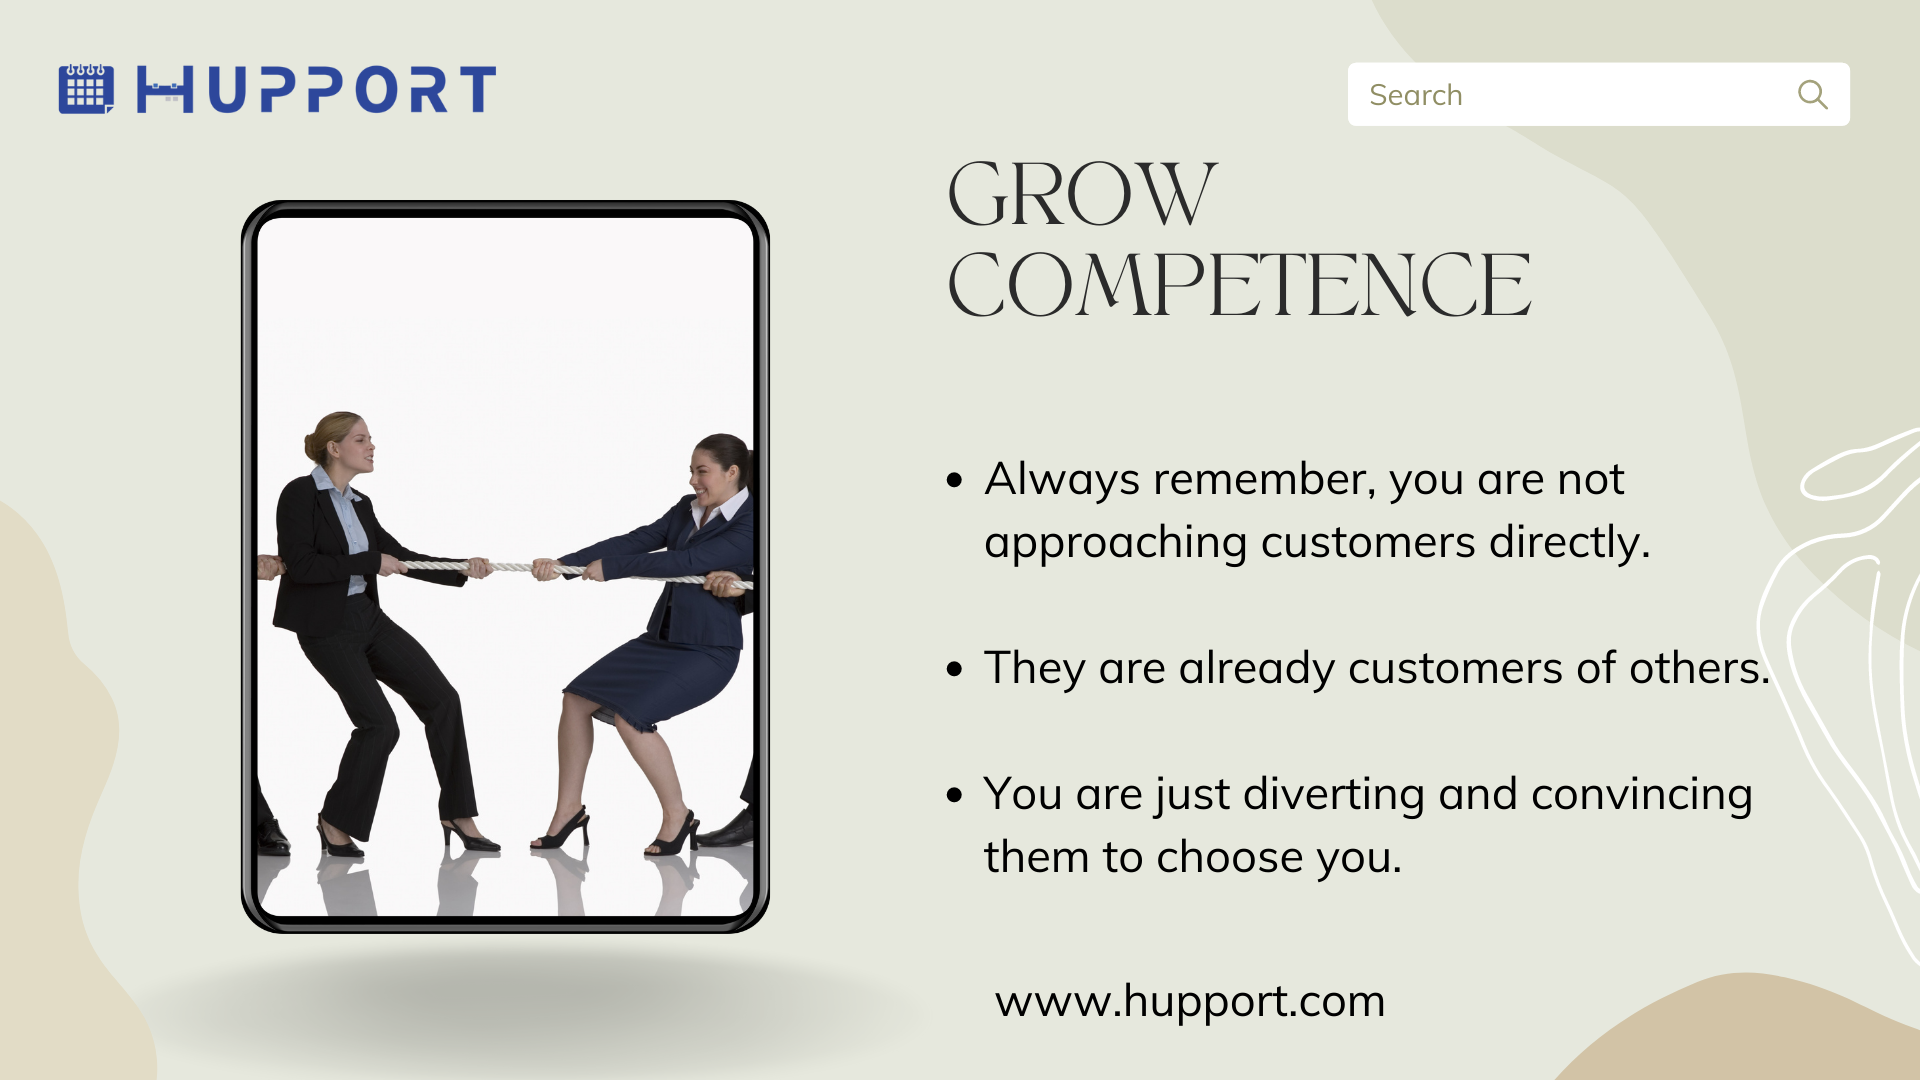 Grow competence